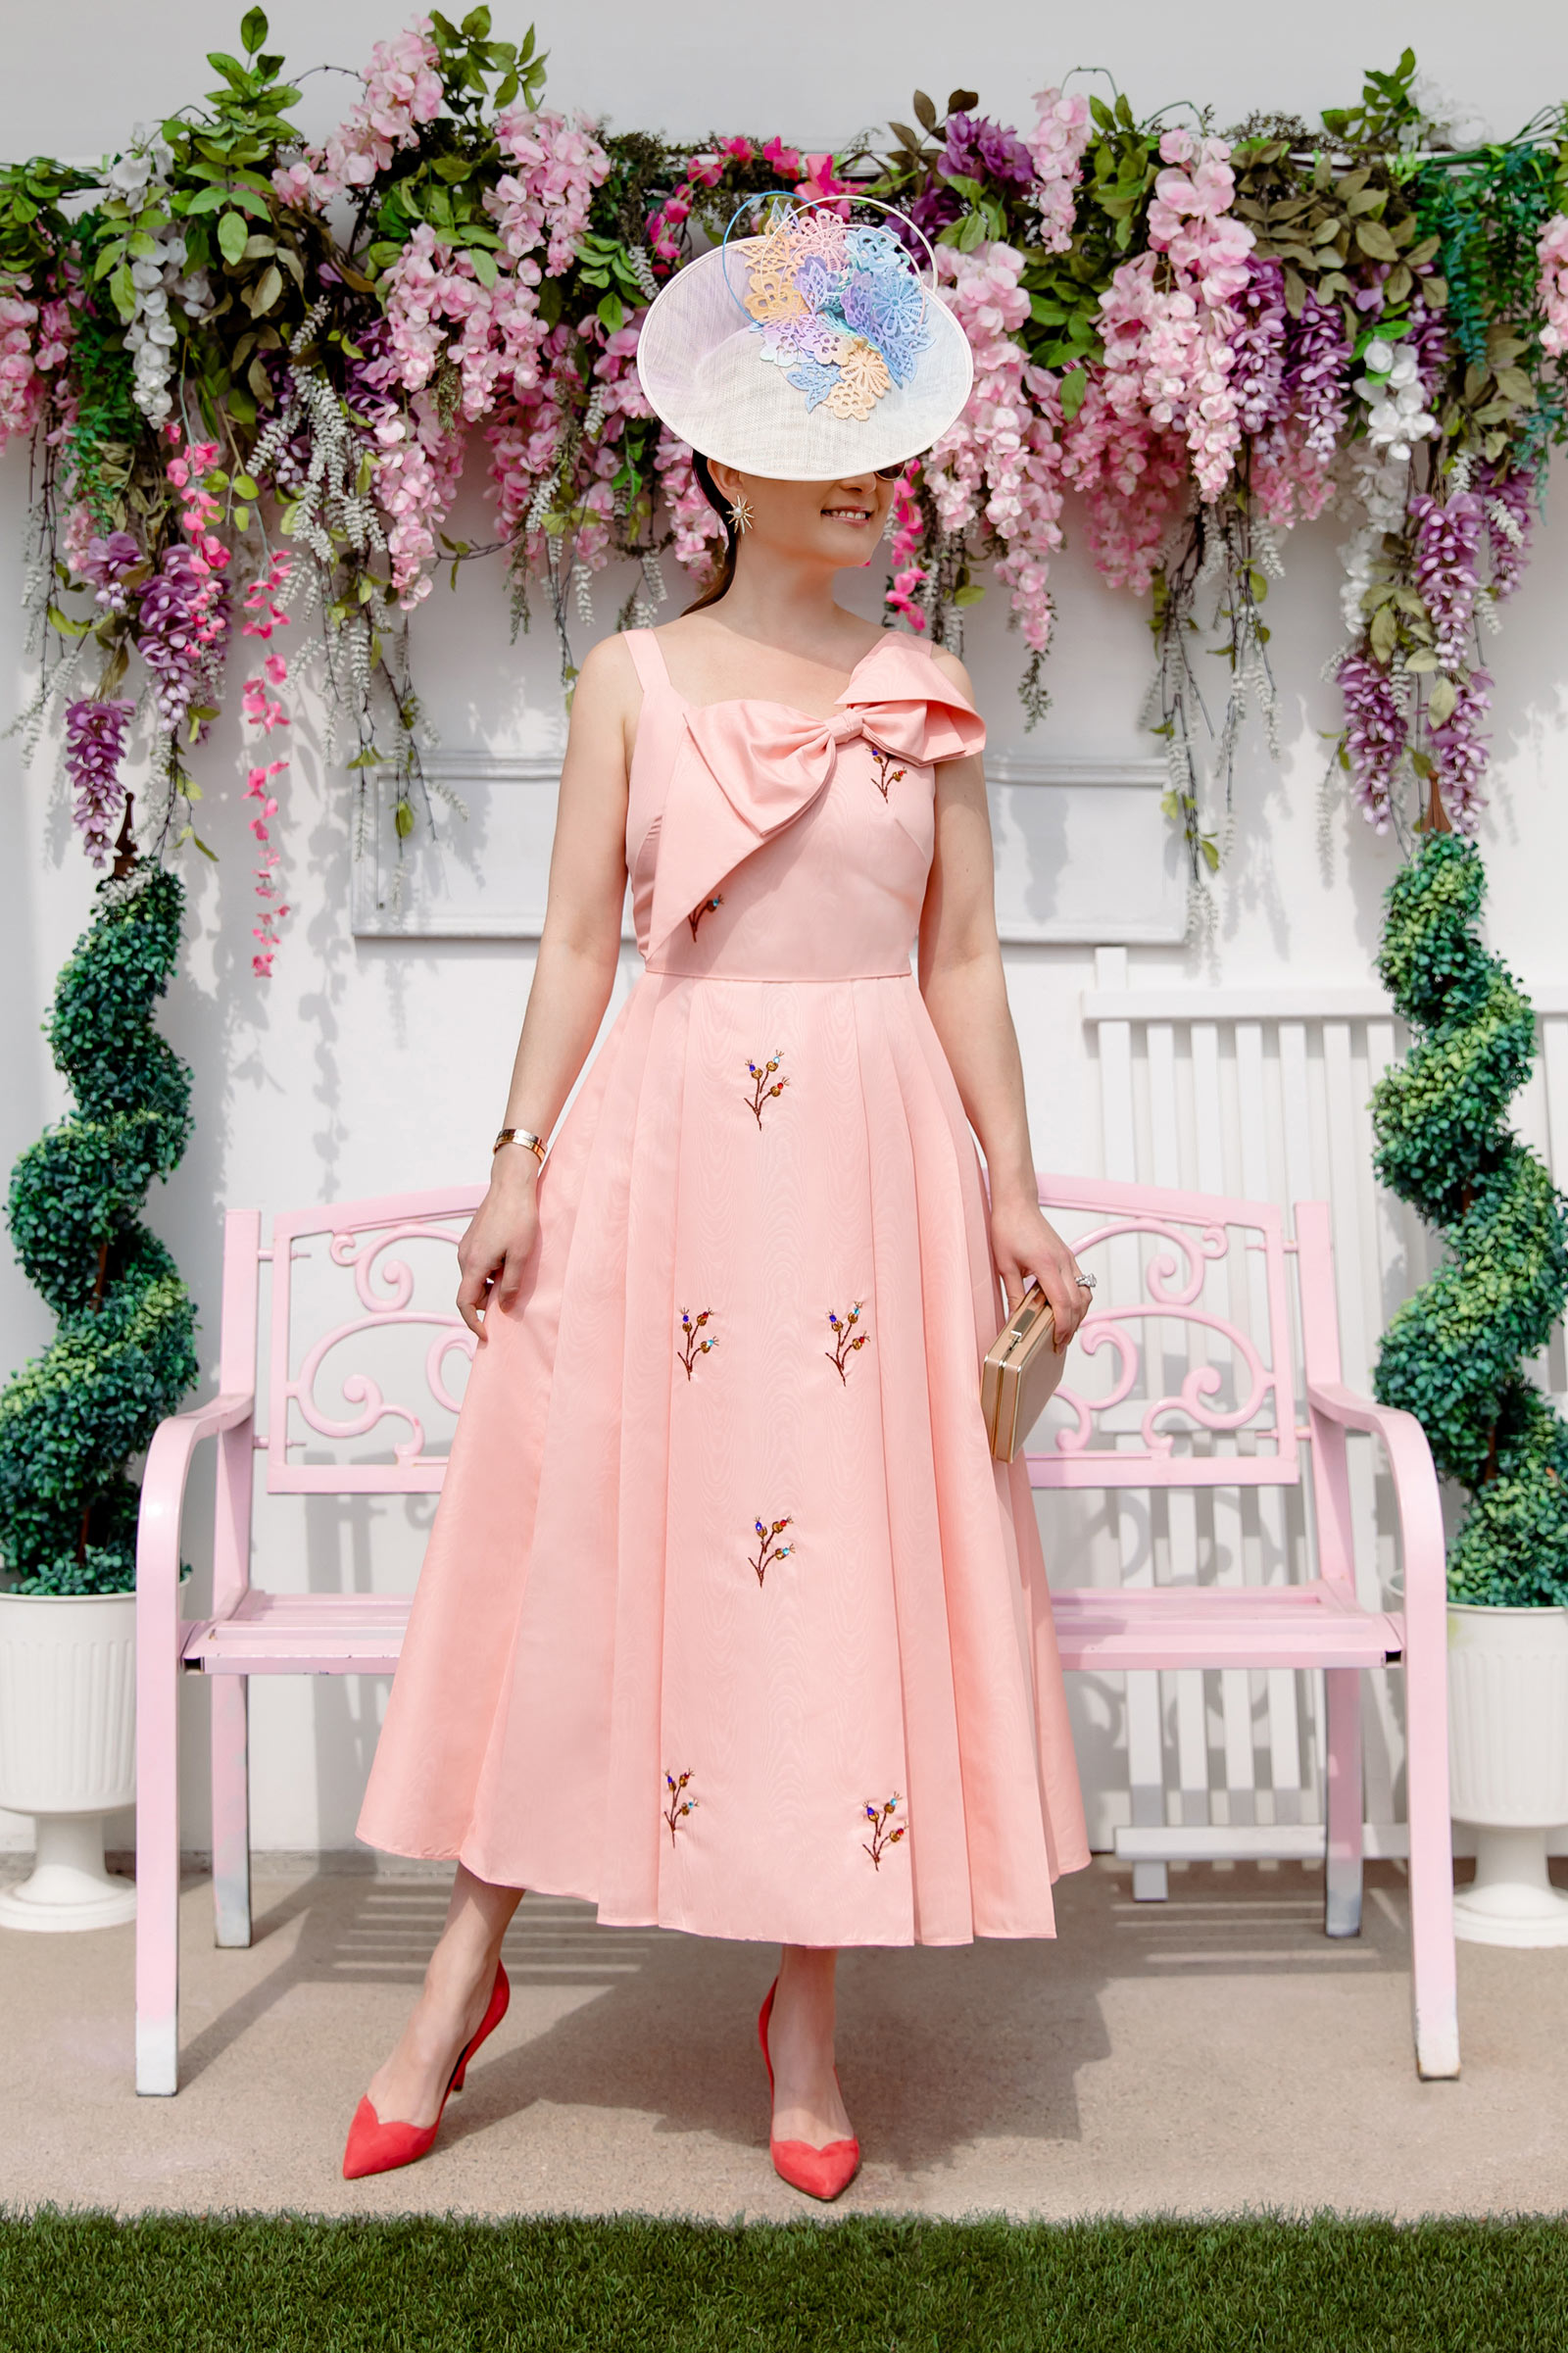 Best dressed at Royal Ascot on Ladies Day